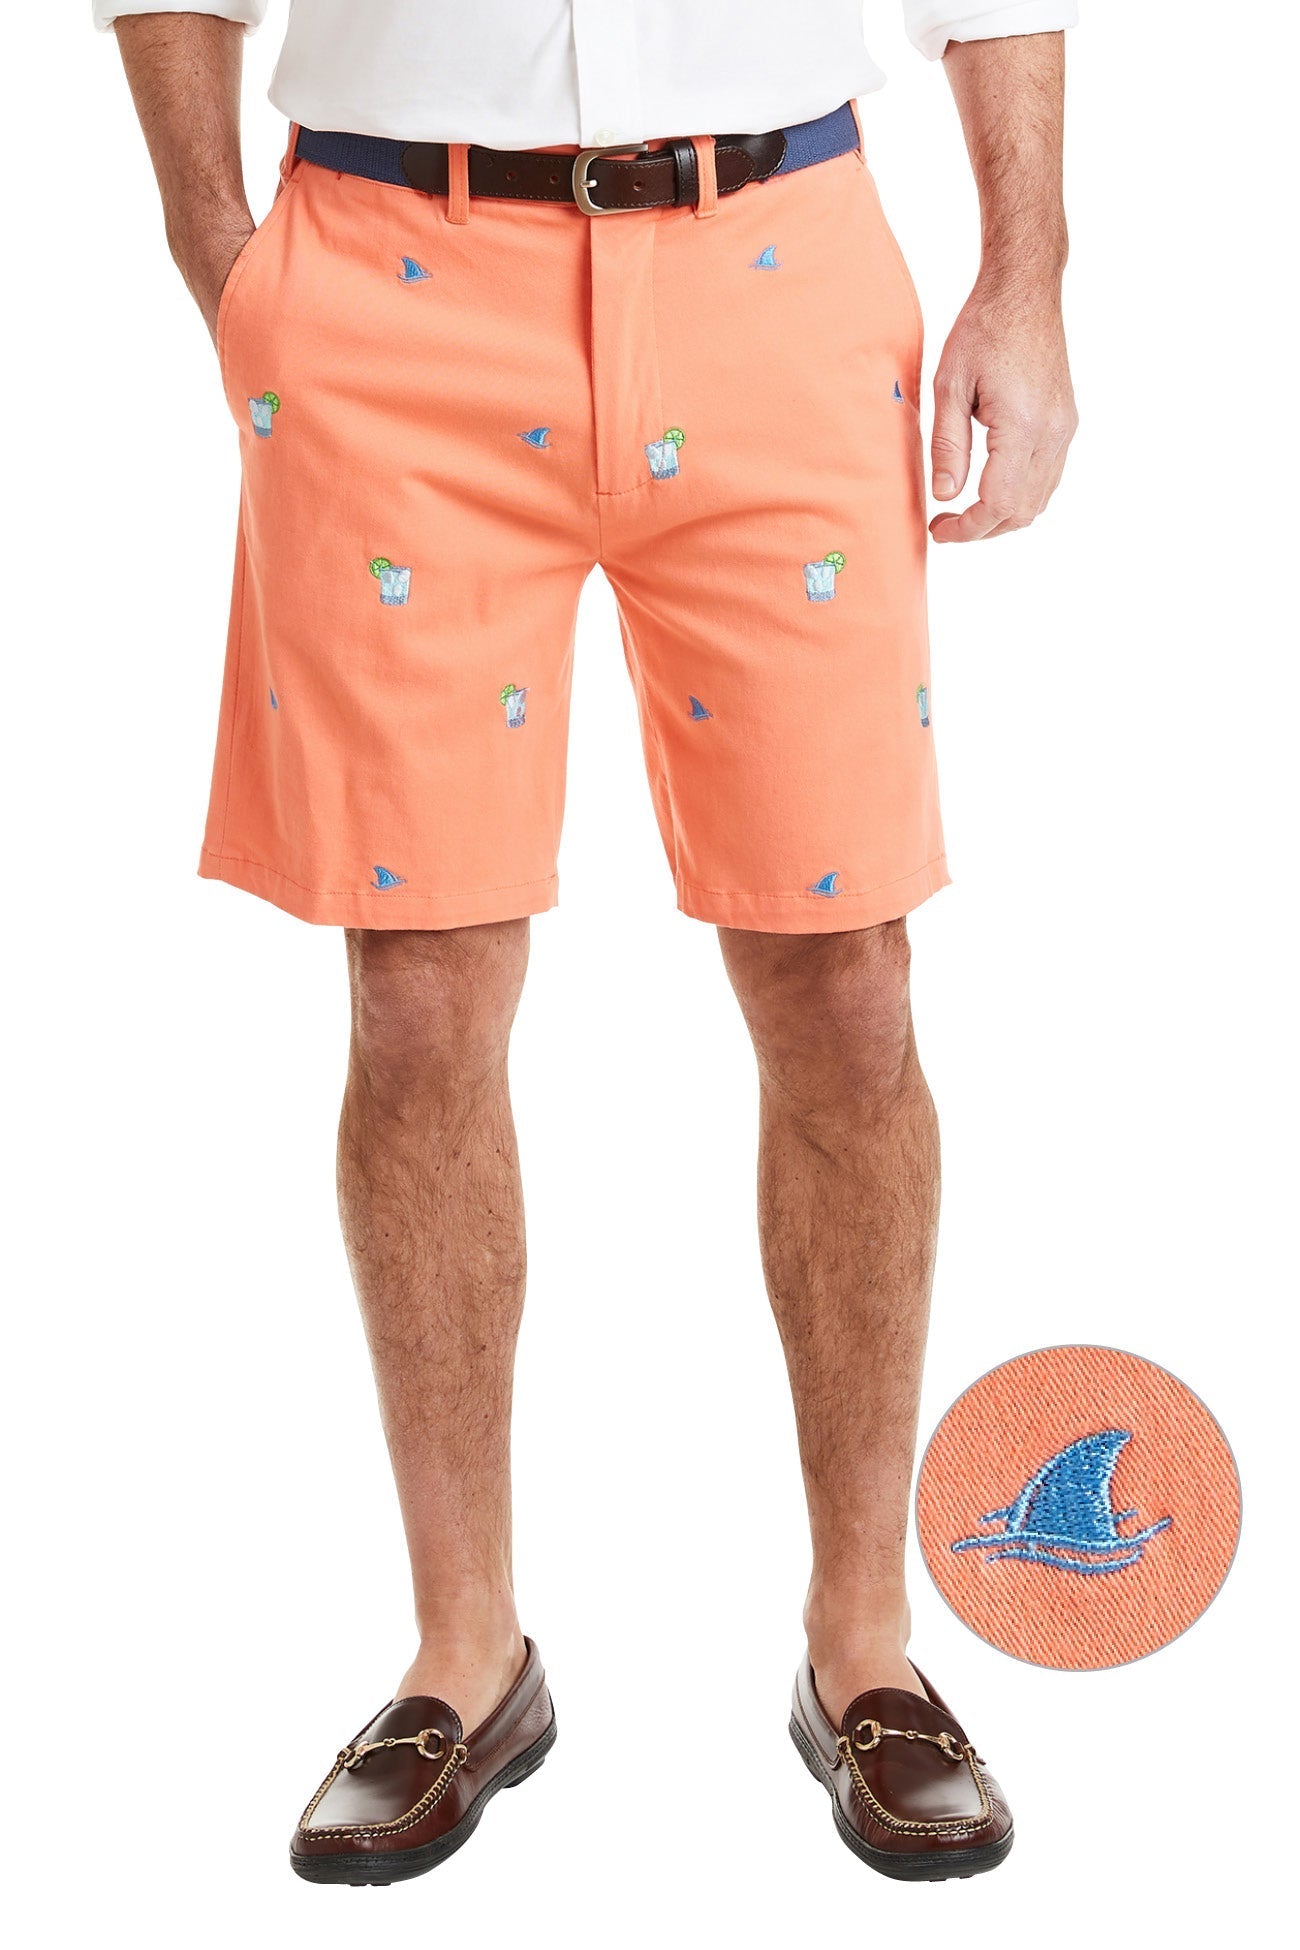 Cisco Short Stretch Twill Coral with Fin & Tonic MENS EMBROIDERED SHORTS Castaway Nantucket Island